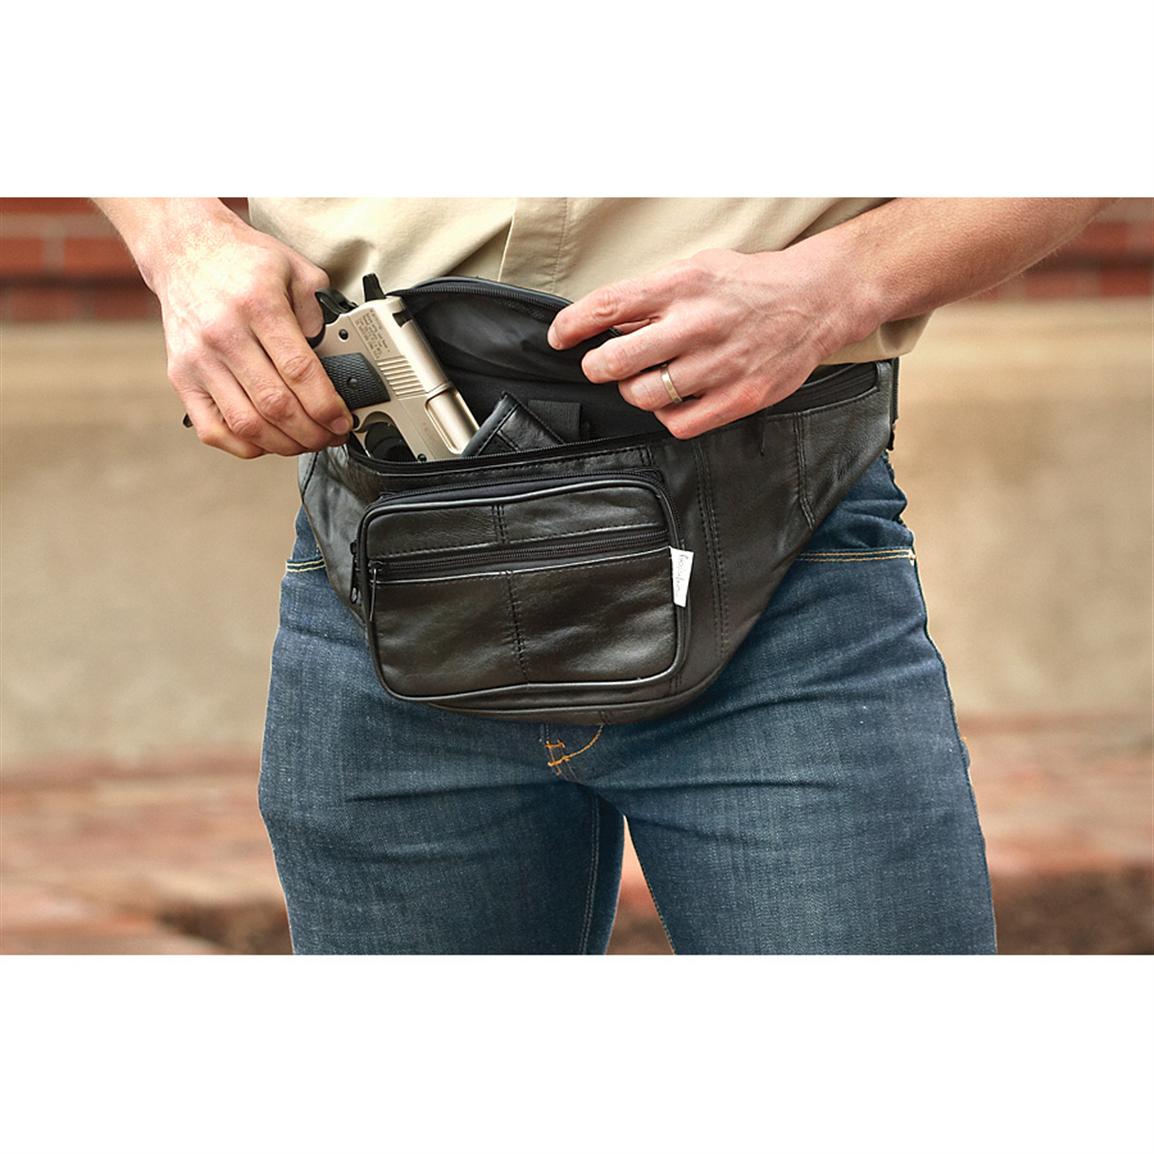 HER TACTICAL Concealed Carry Fanny Pack For Compact Gun | lupon.gov.ph